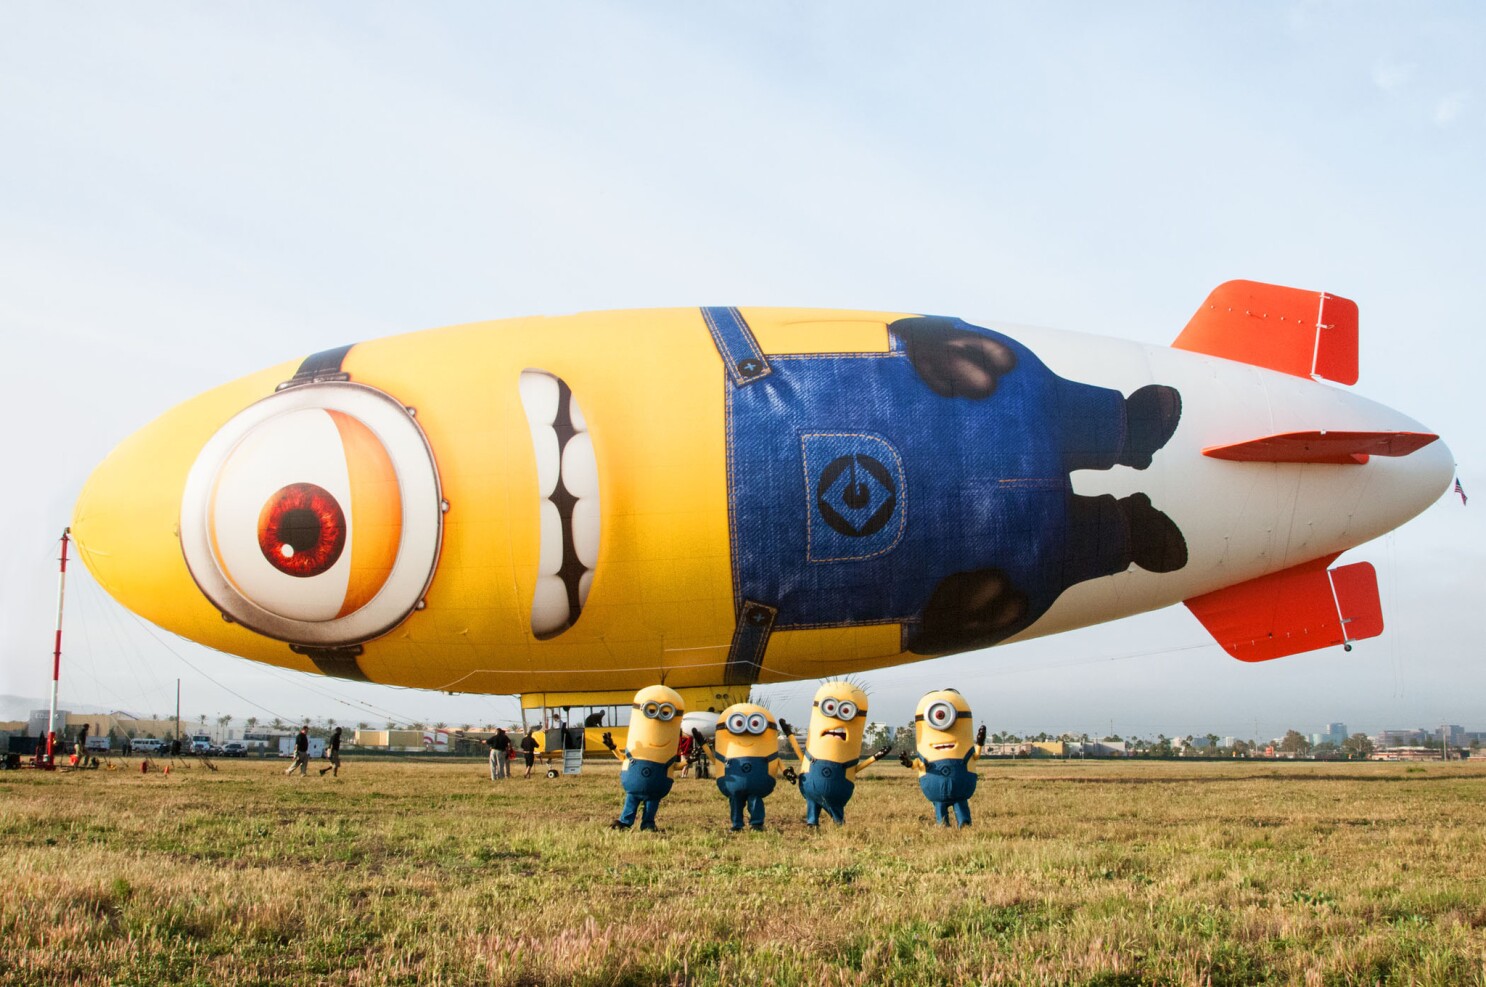 Despicable Me 2 Blimp Enters New Frontier Of Movie Marketing Los Angeles Times